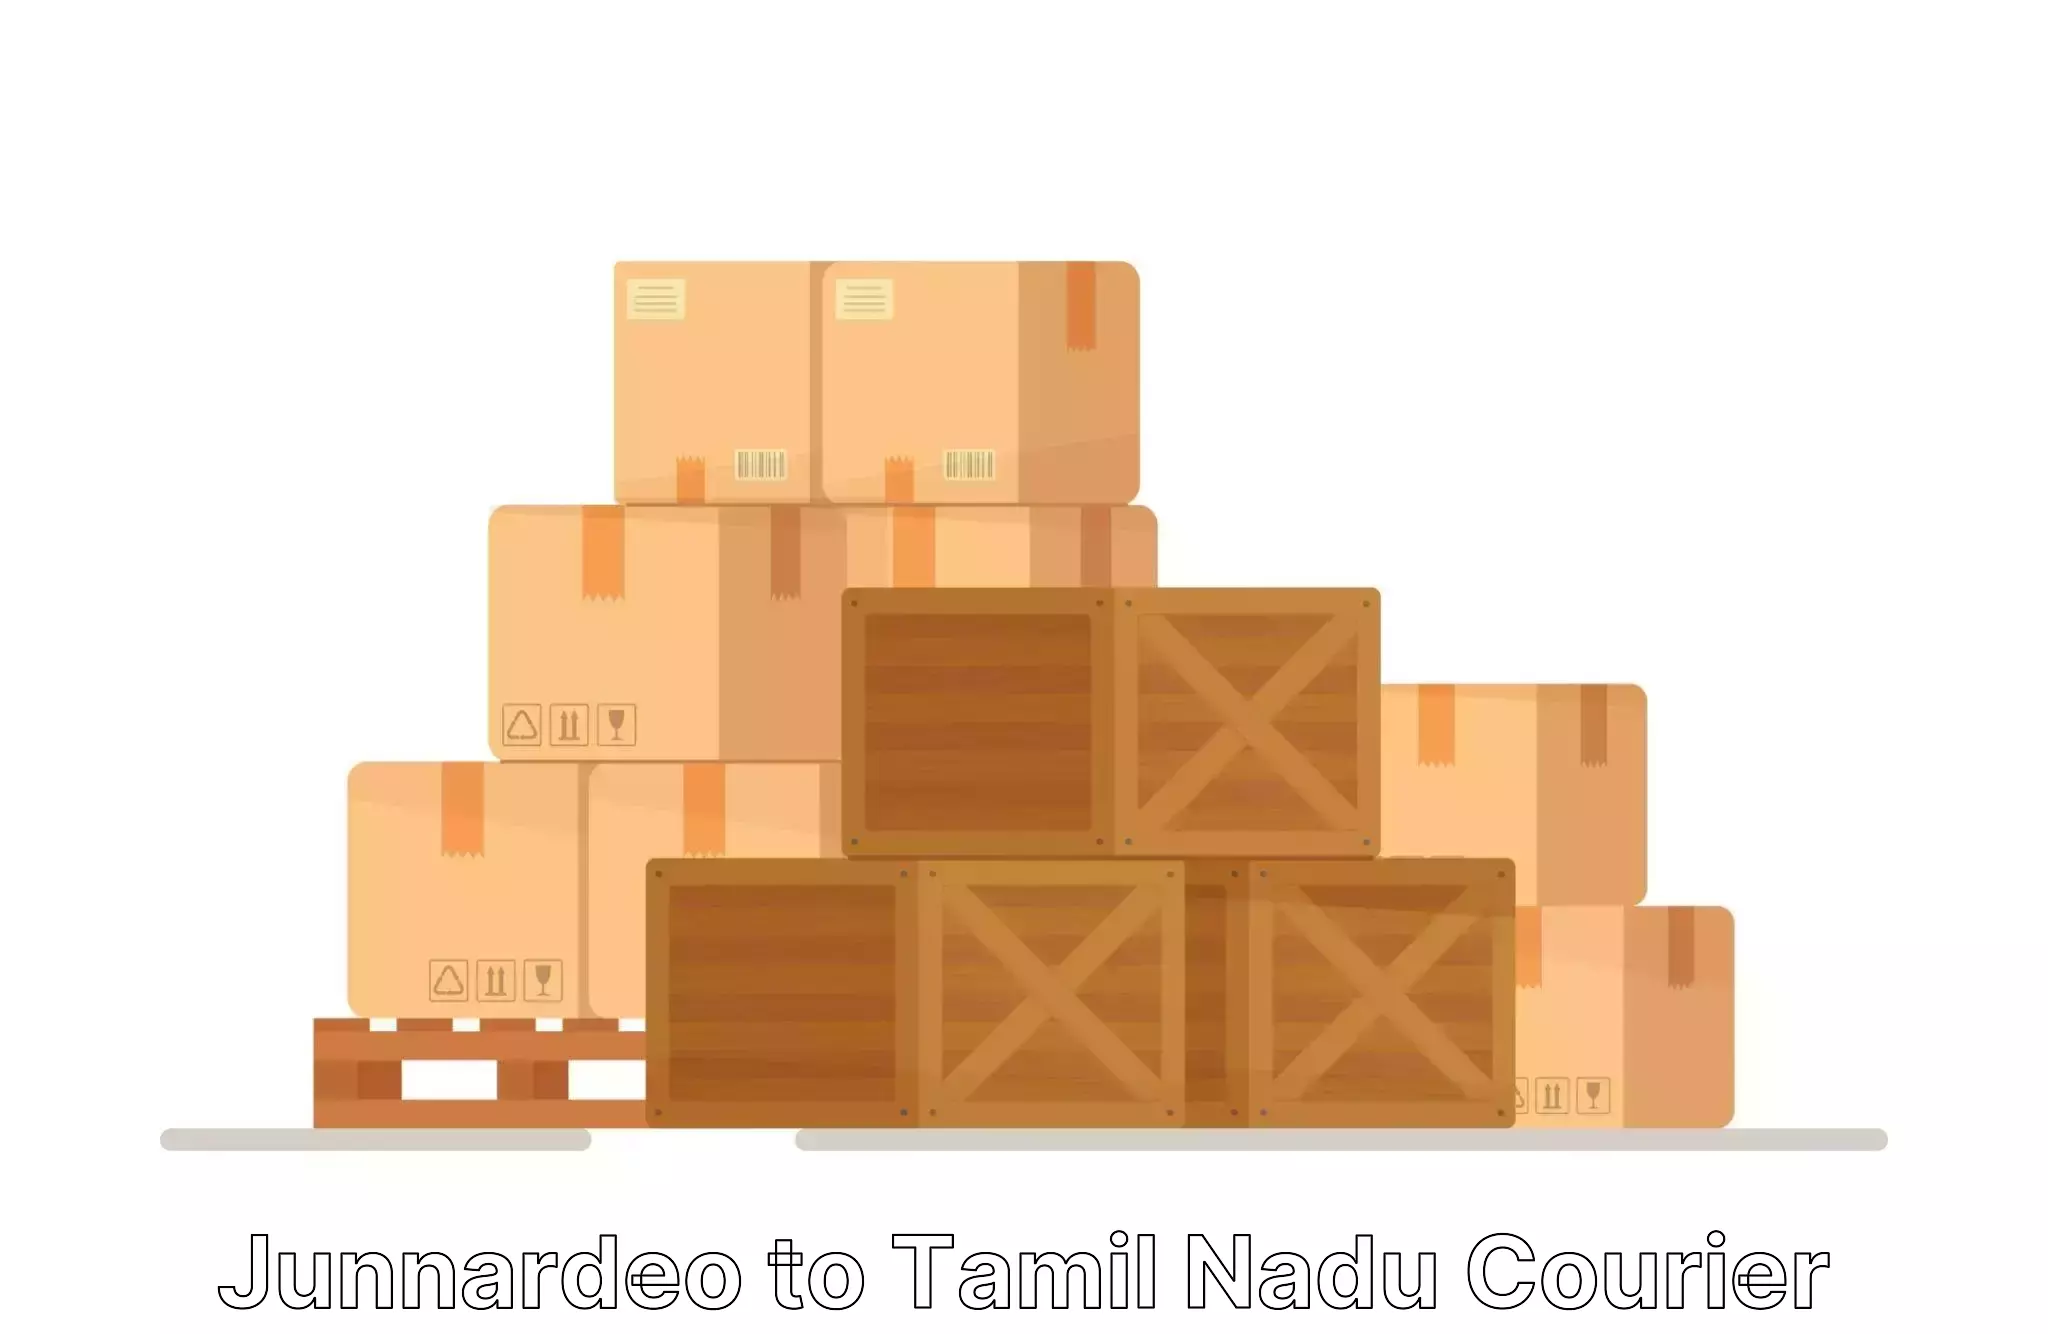 Personalized moving and storage in Junnardeo to Nanguneri